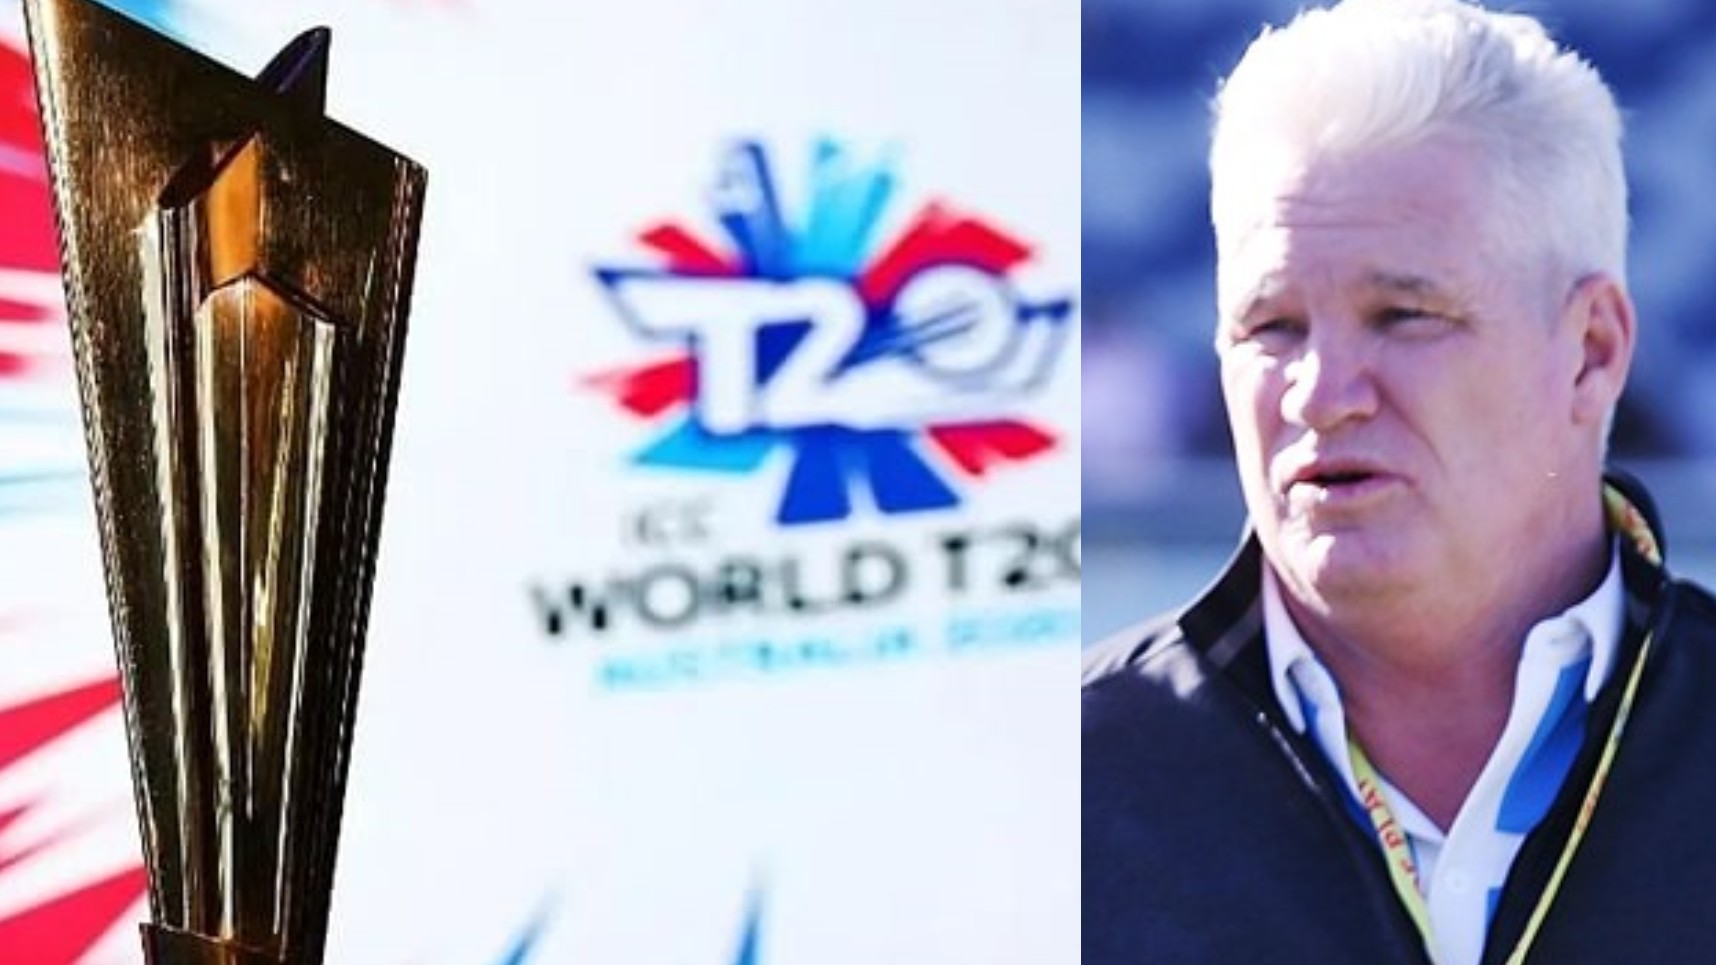 “We’re in deep trouble if things don’t change,” says Dean Jones with respect to T20 World Cup 2020